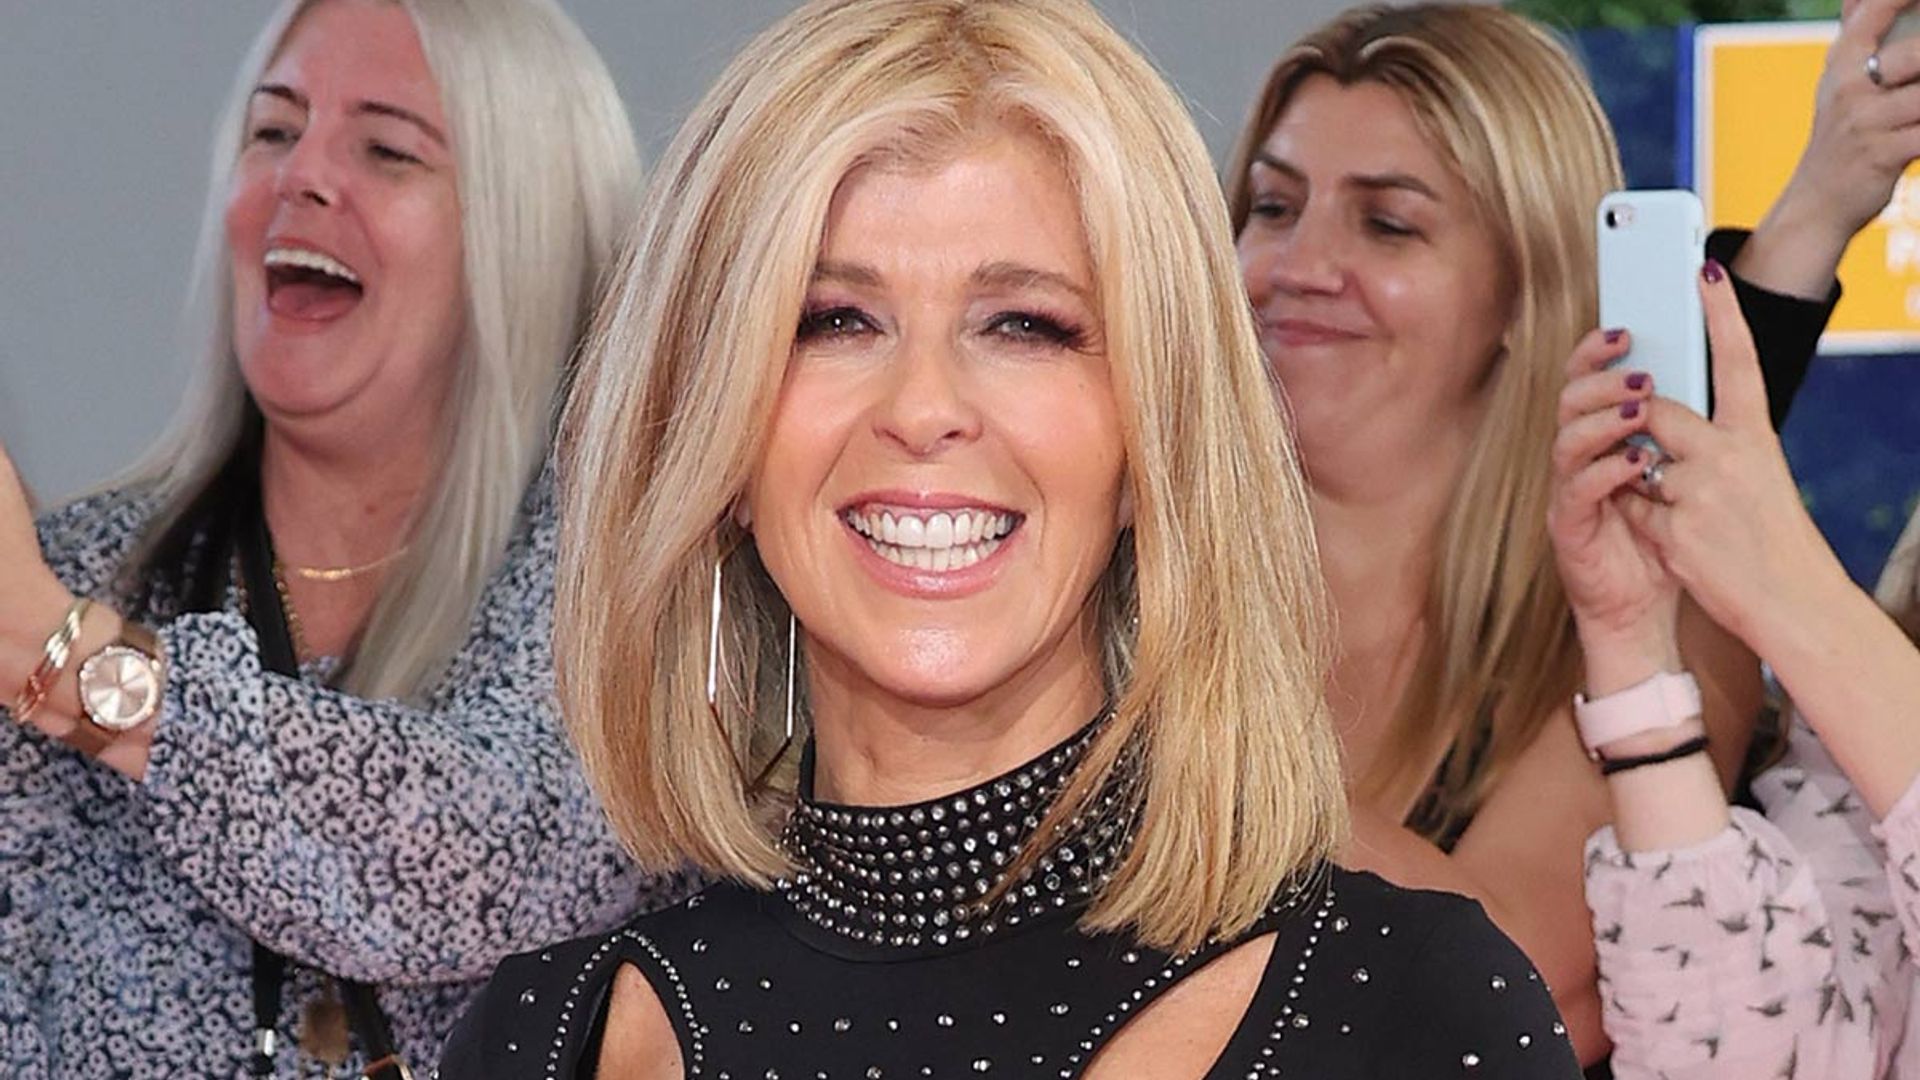 Kate Garraway stuns in black fitted dress for emotional NTA Awards appearance